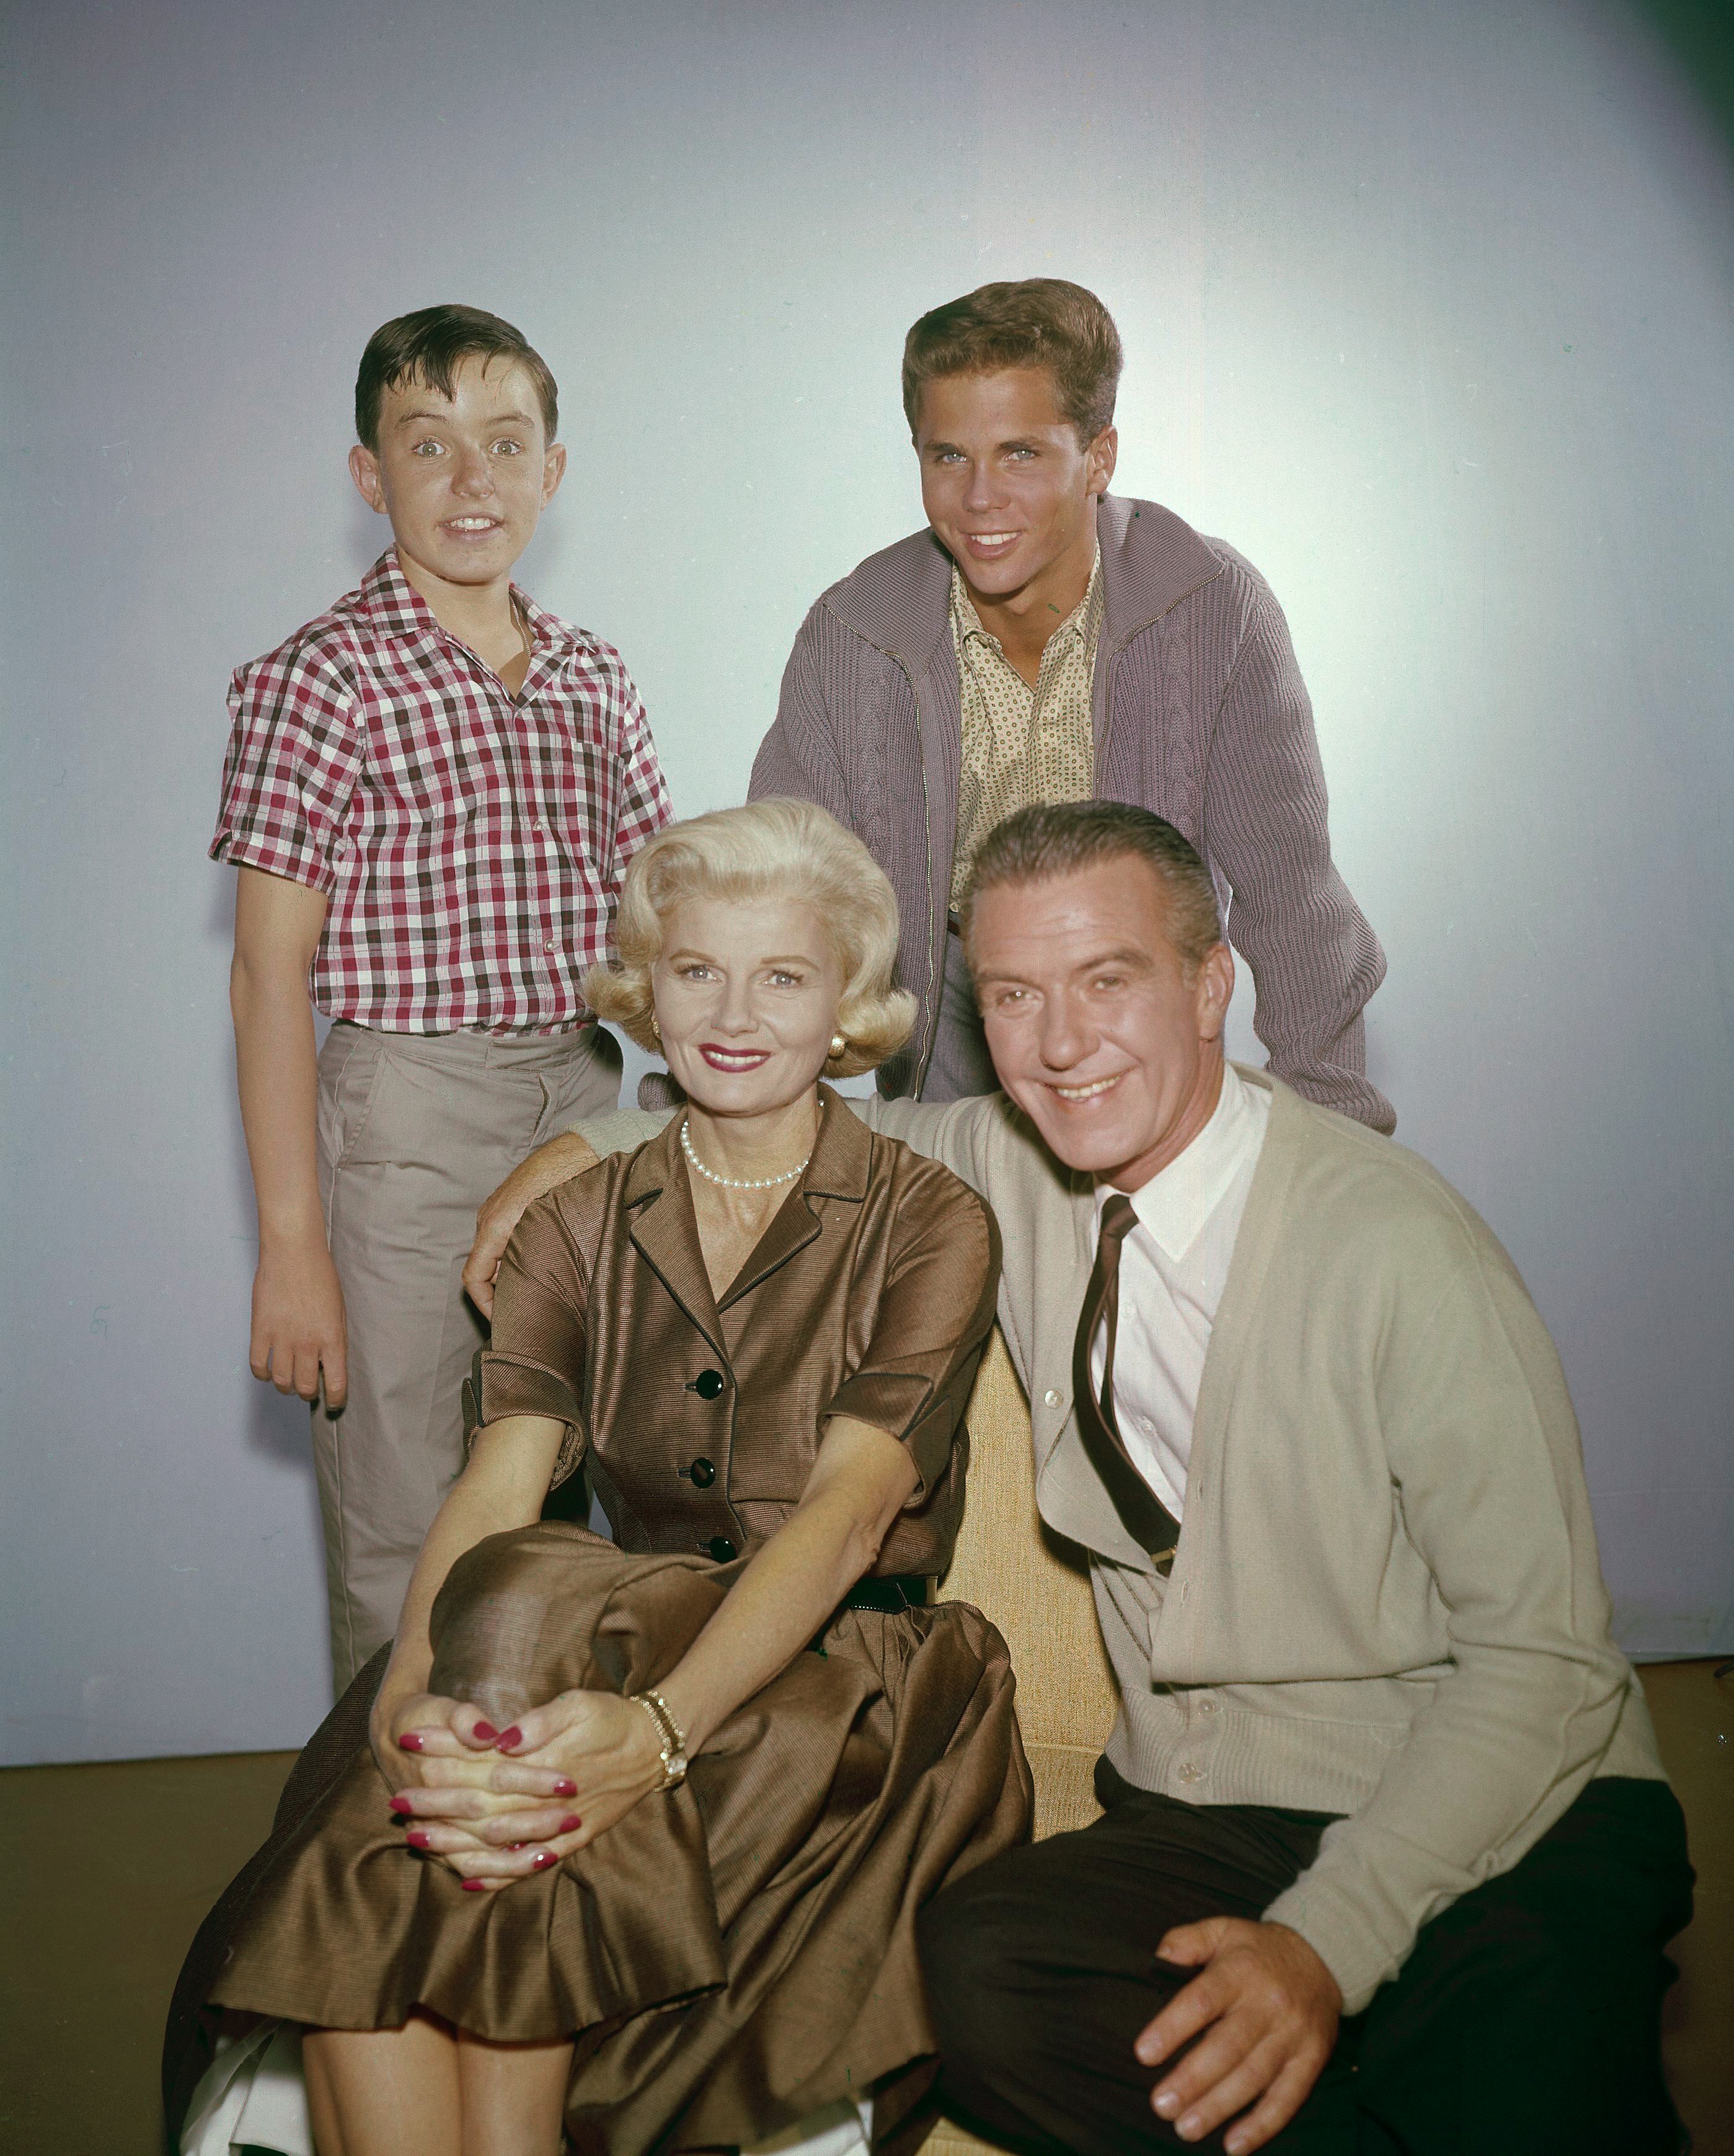 Jerry Mathers, Barbara Billingsley, Tony Dow, and Hugh Beaumont posing in an undated "Leave It to Beaver" photo | Source: Getty Images